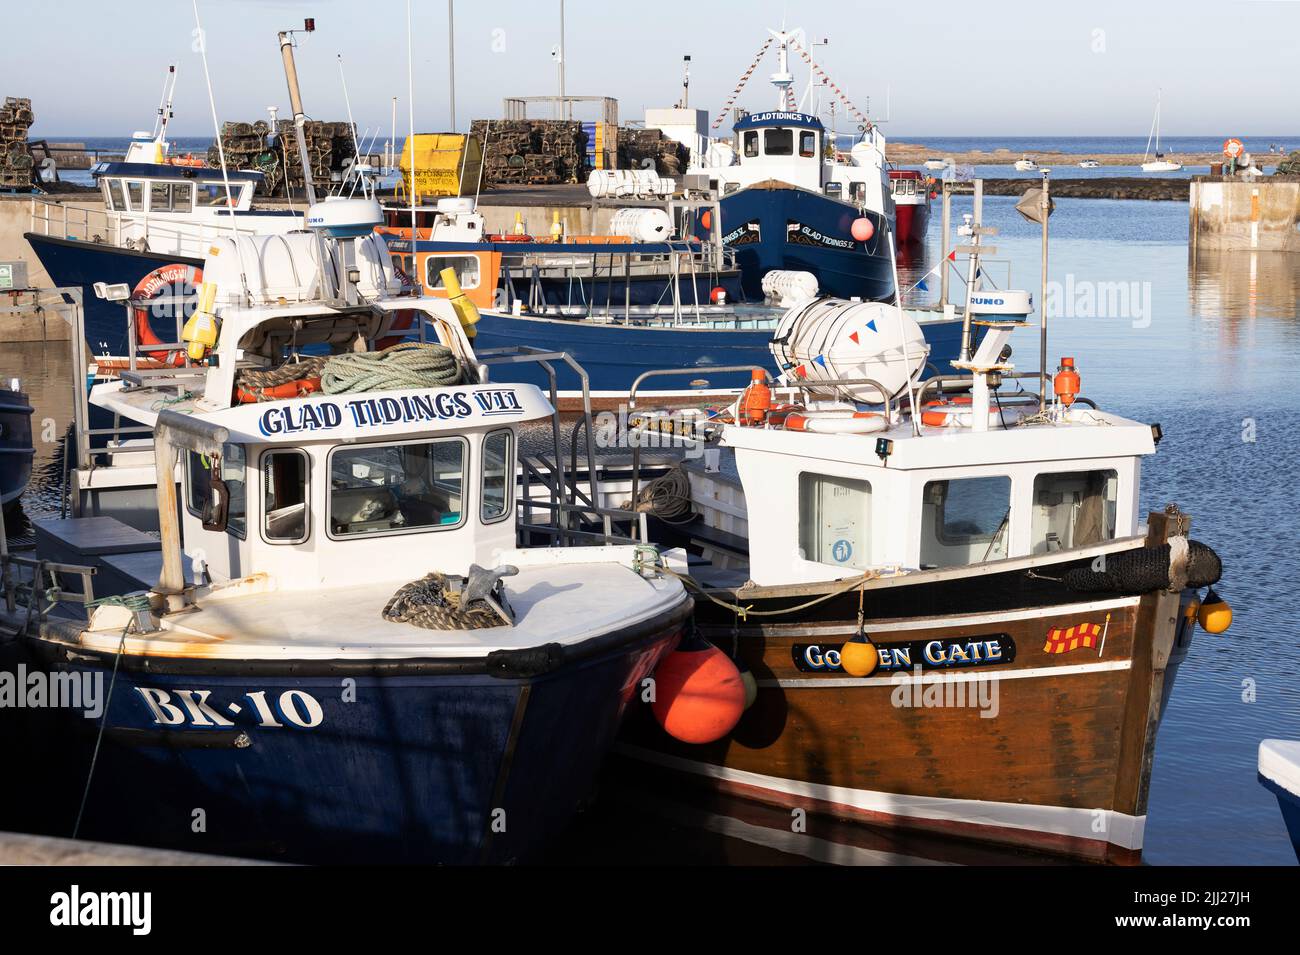 Evening sunlight on the day trip excursion boats moored in the harbour at Seahouses, Northumberland, England Stock Photo